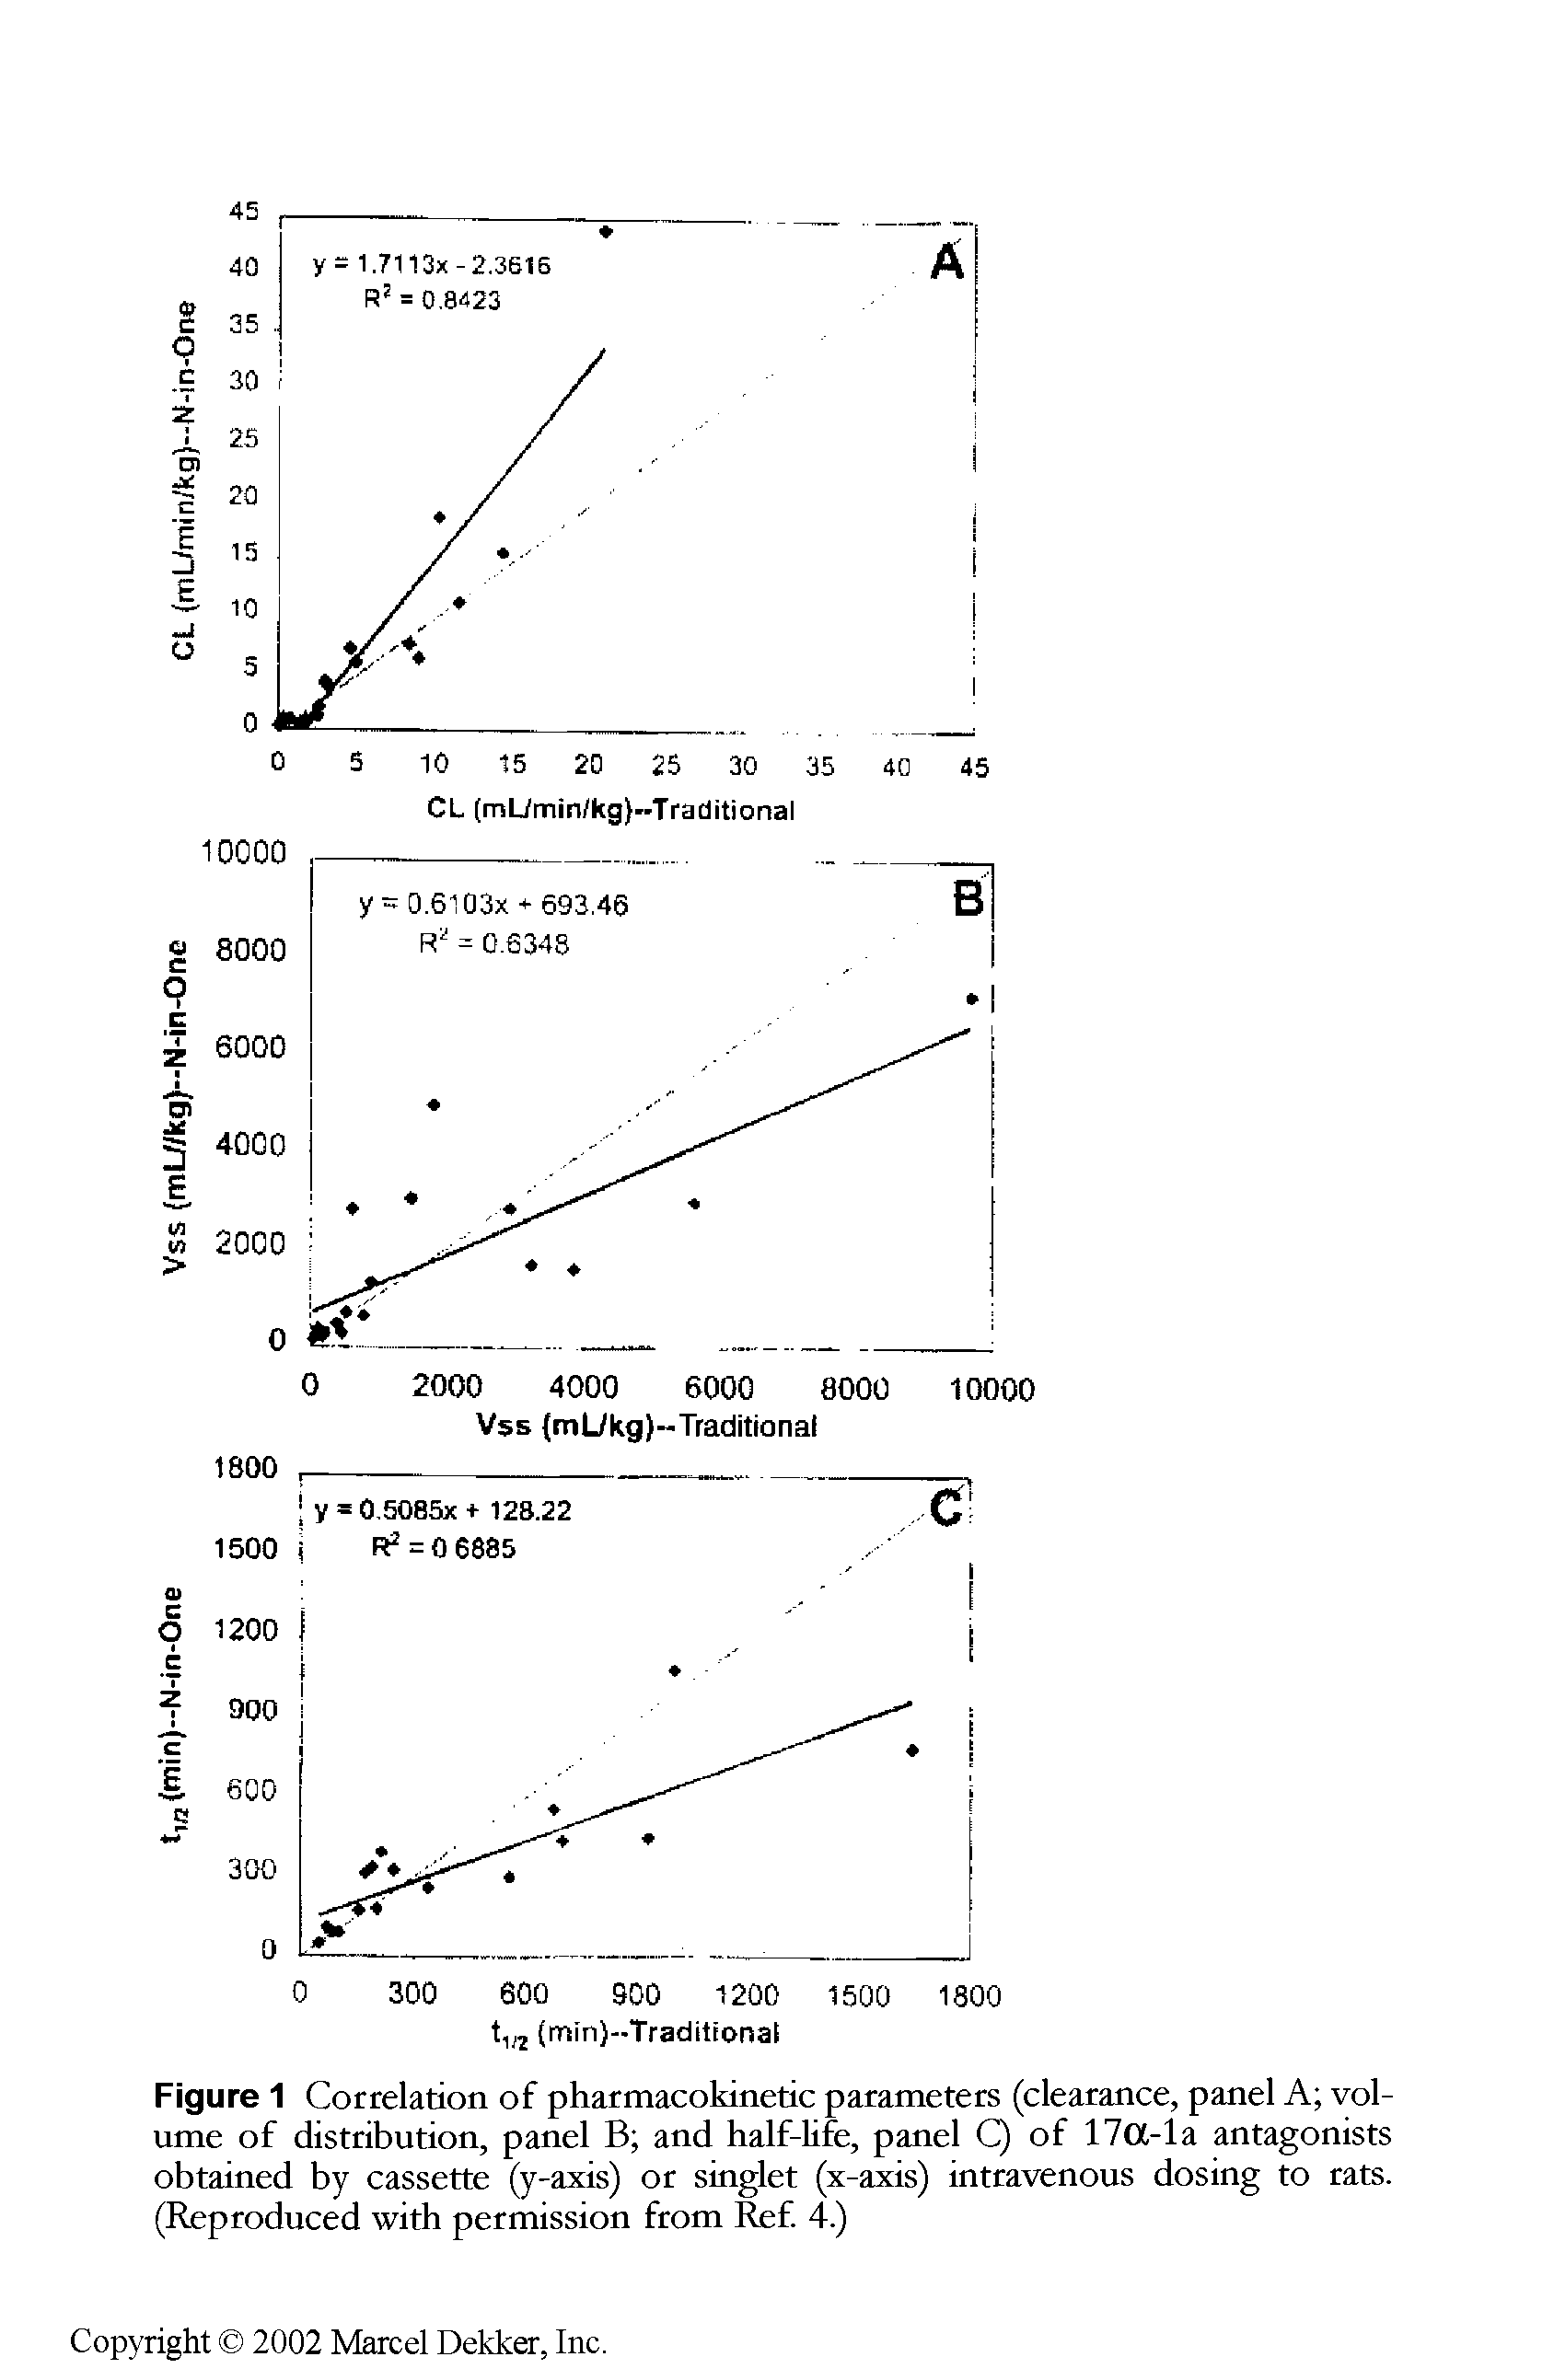 Figure 1 Correlation of pharmacokinetic parameters (clearance, panel A volume of distribution, panel B and half-life, panel Q of 170C-la antagonists obtained by cassette (y-axis) or singlet (x-axis) intravenous dosing to rats. (Reproduced with permission from Ref. 4.)...